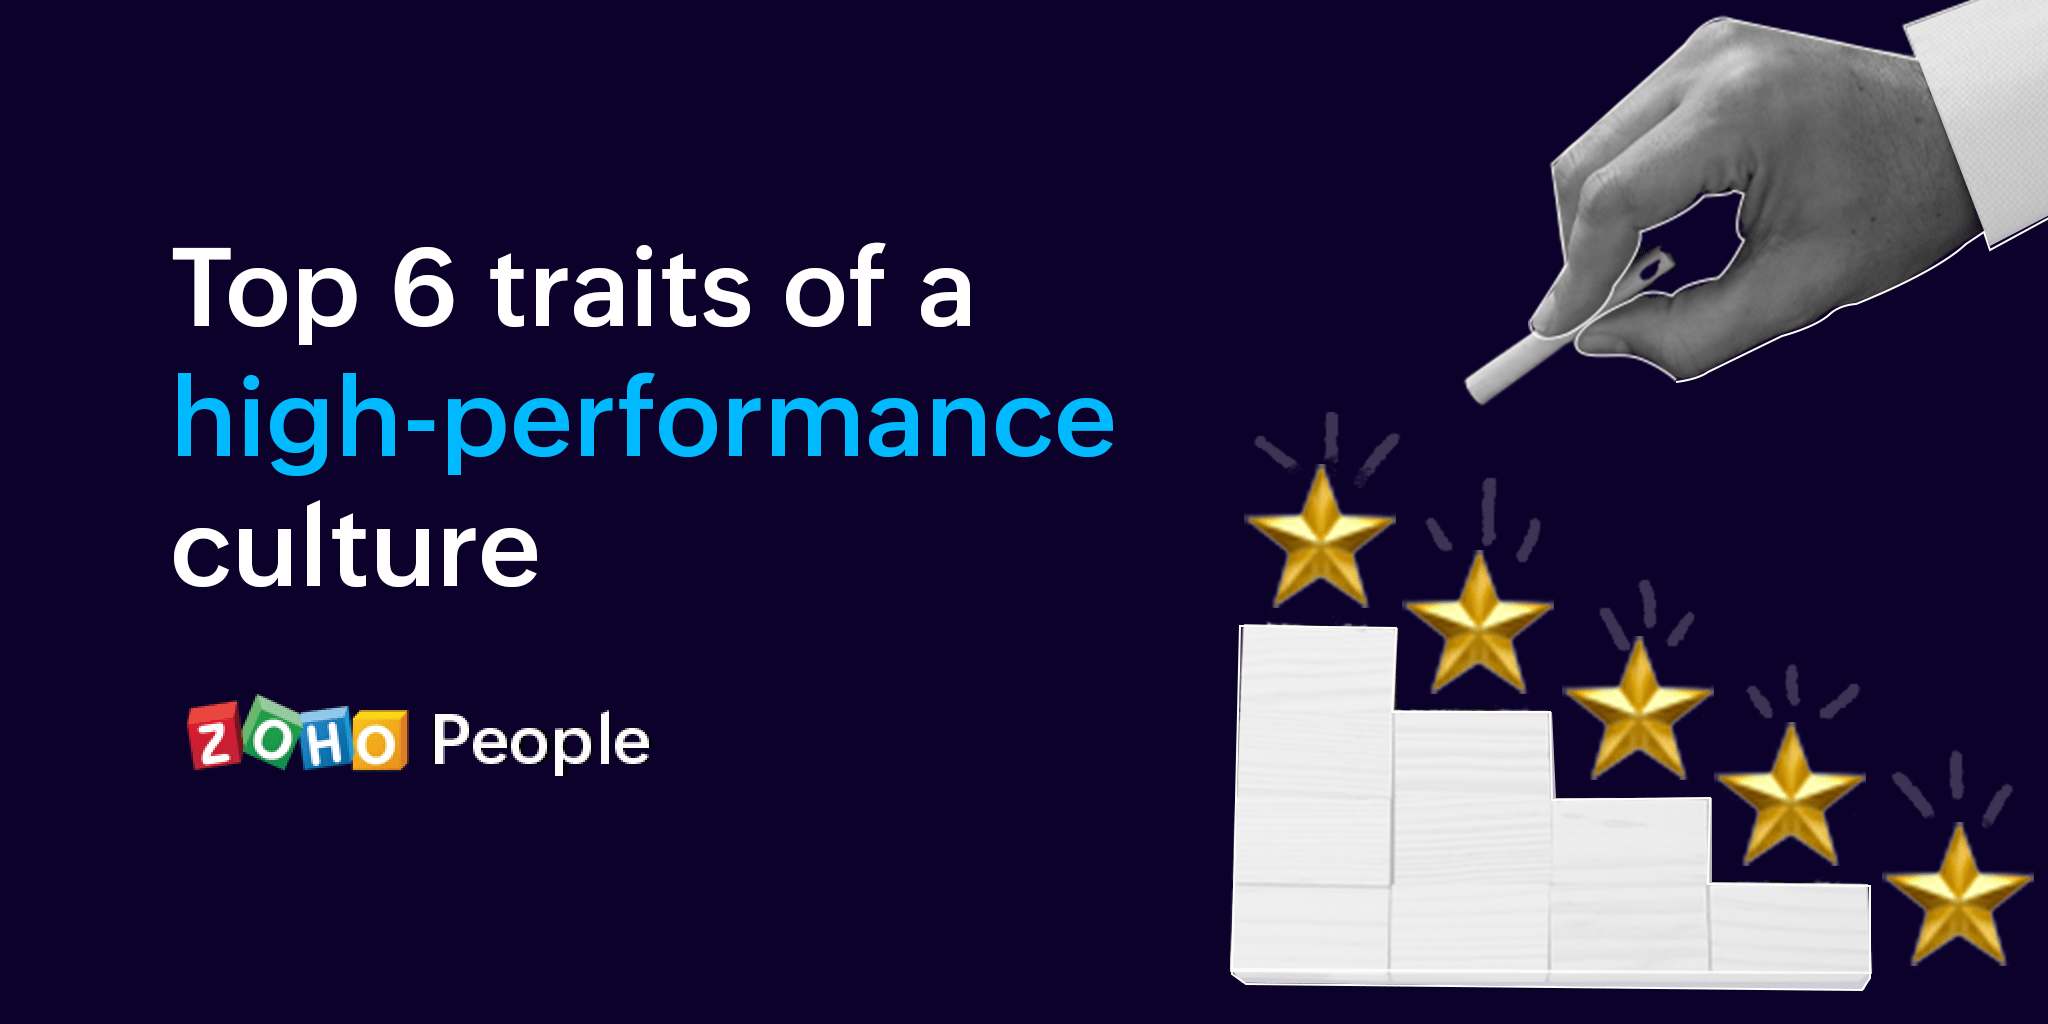 Building a high-performance culture